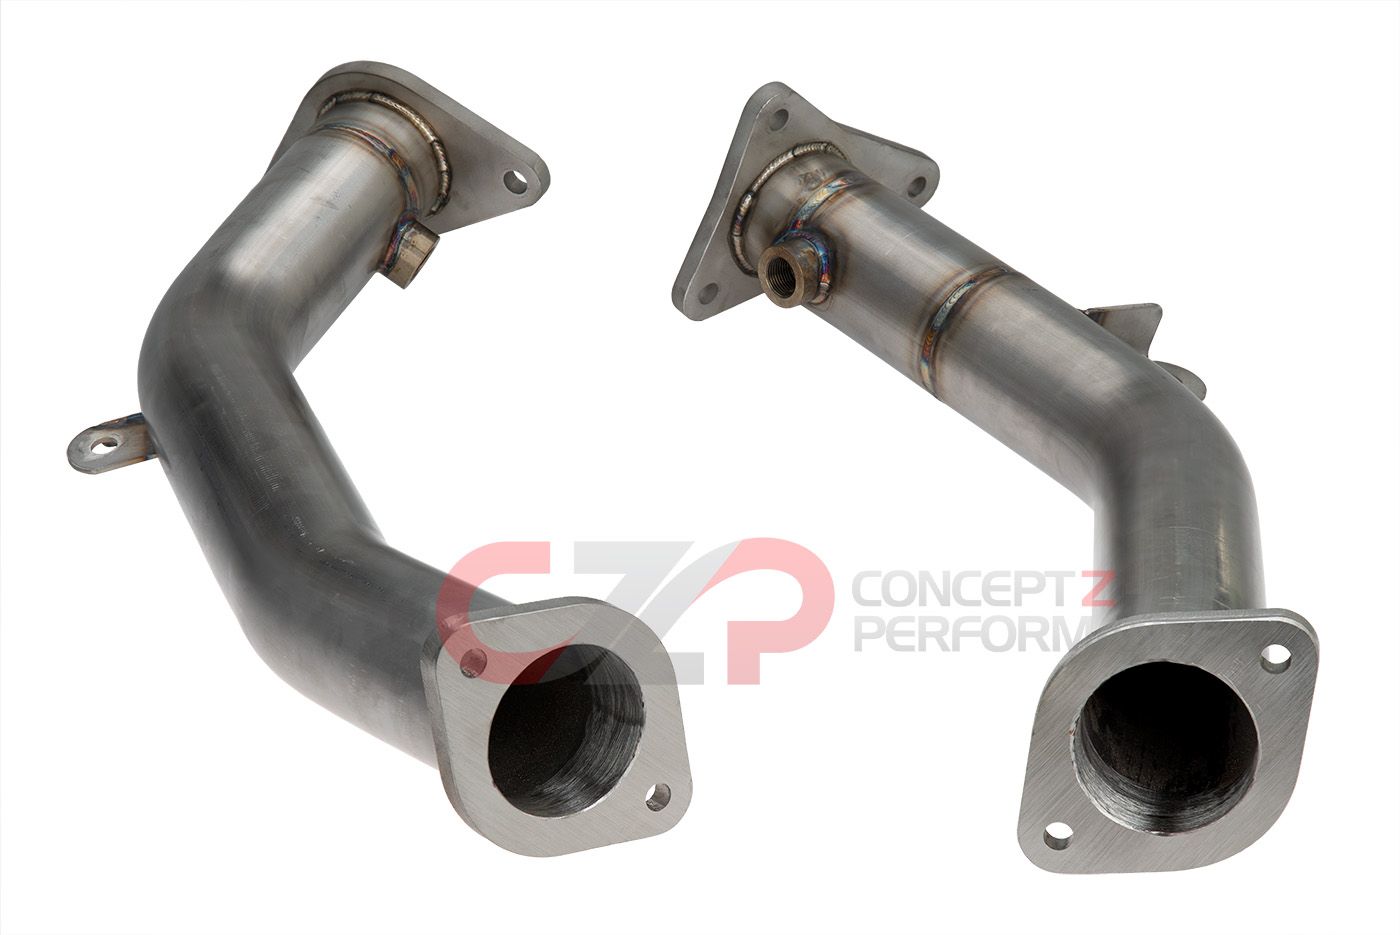 CZP by PPE Stainless Steel Lower Downpipes, 2.5" - Nissan Z / Infiniti Q50, Q60 3.0t VR30DDTT